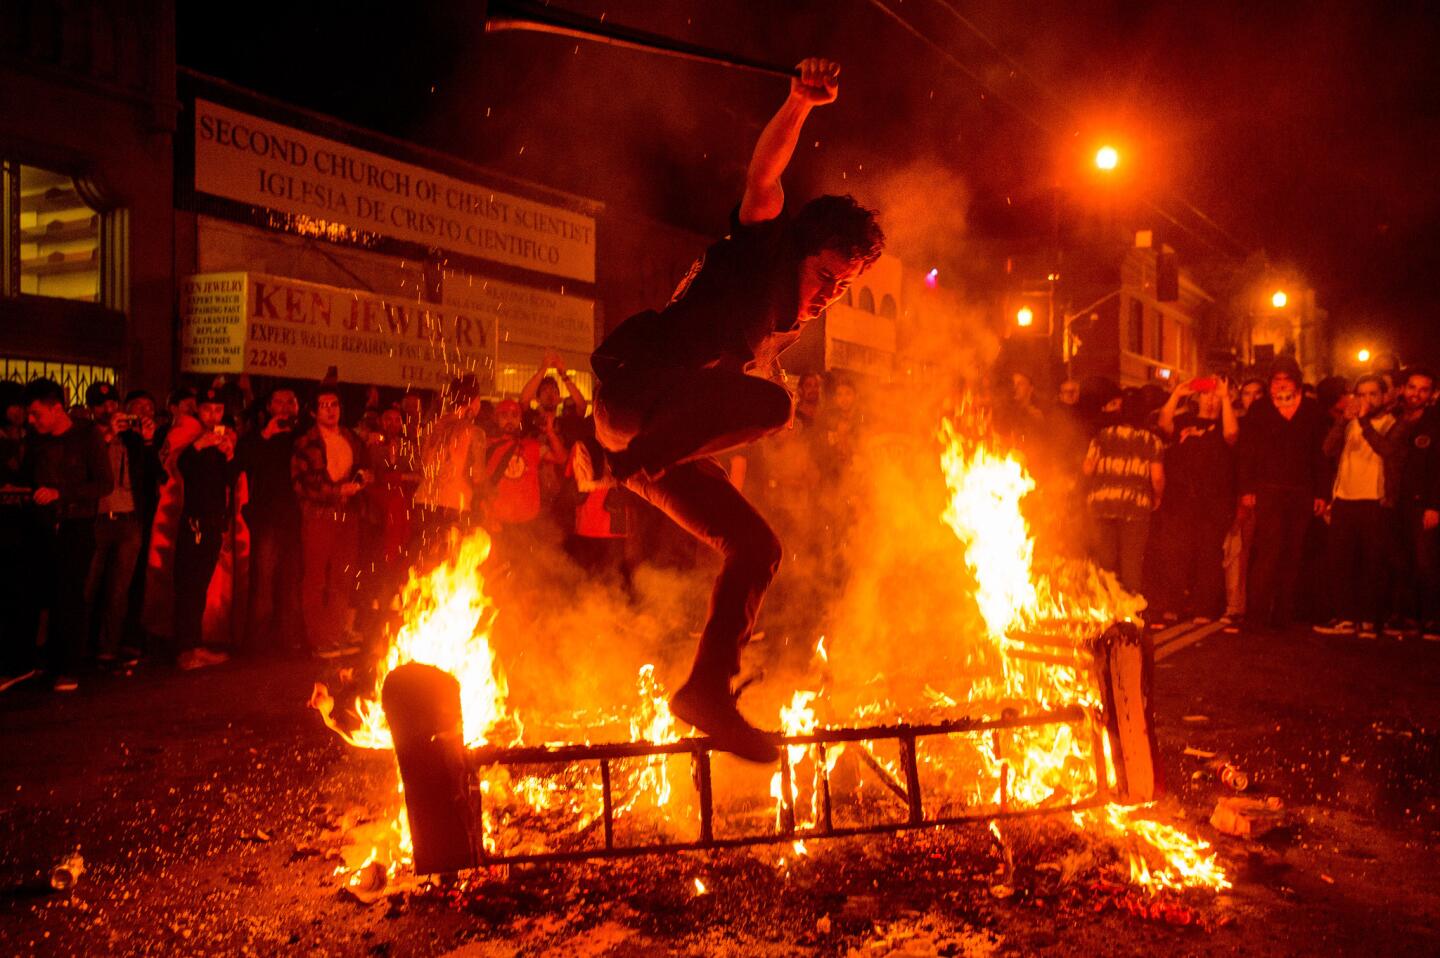 A man jumps over a burning couch in San Francisco's Mission district after the San Francisco Giants defeated the Kansas City Royals to win the World Series.